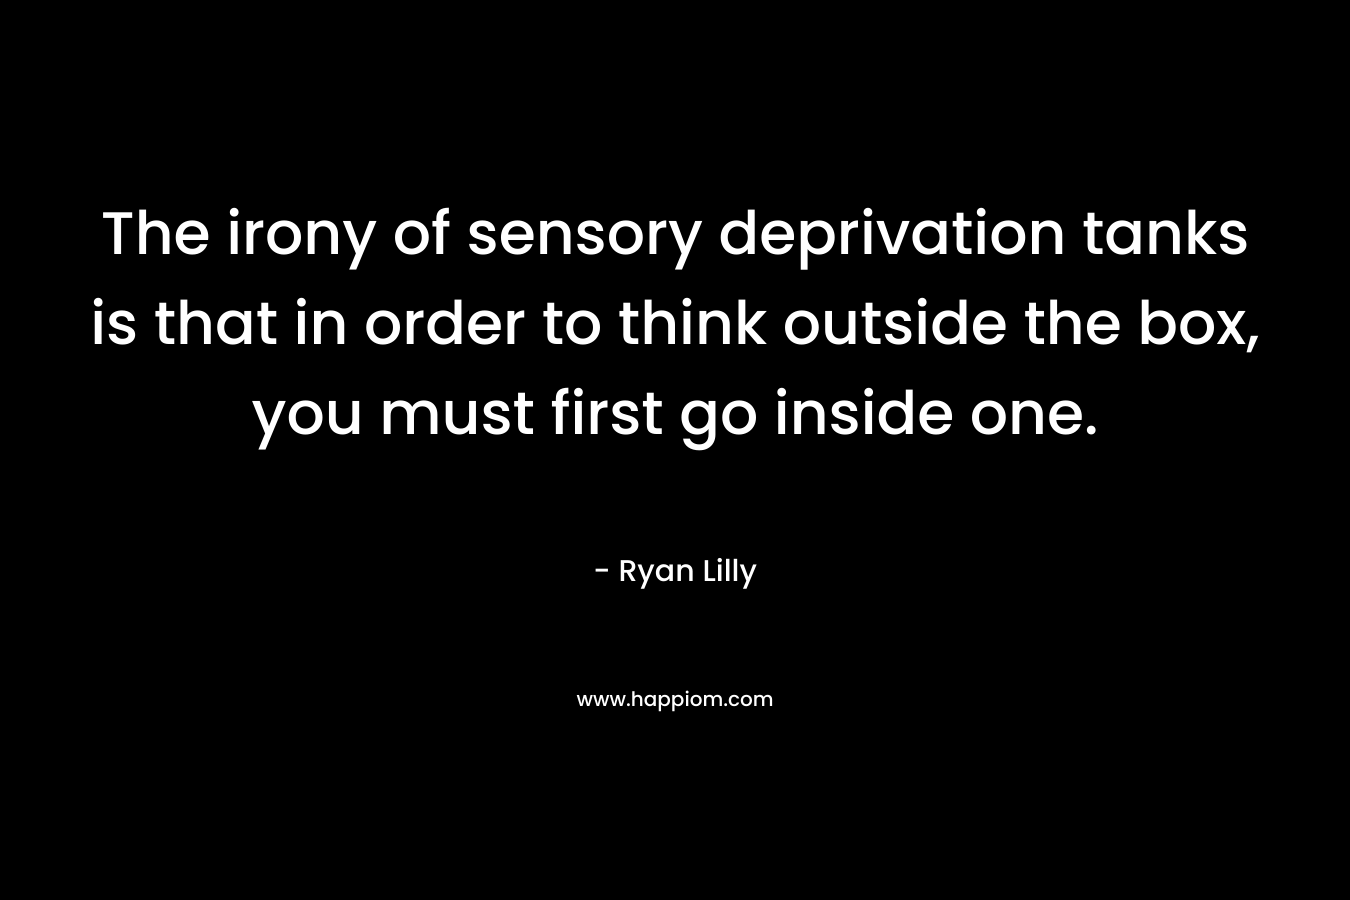 The irony of sensory deprivation tanks is that in order to think outside the box, you must first go inside one. – Ryan Lilly